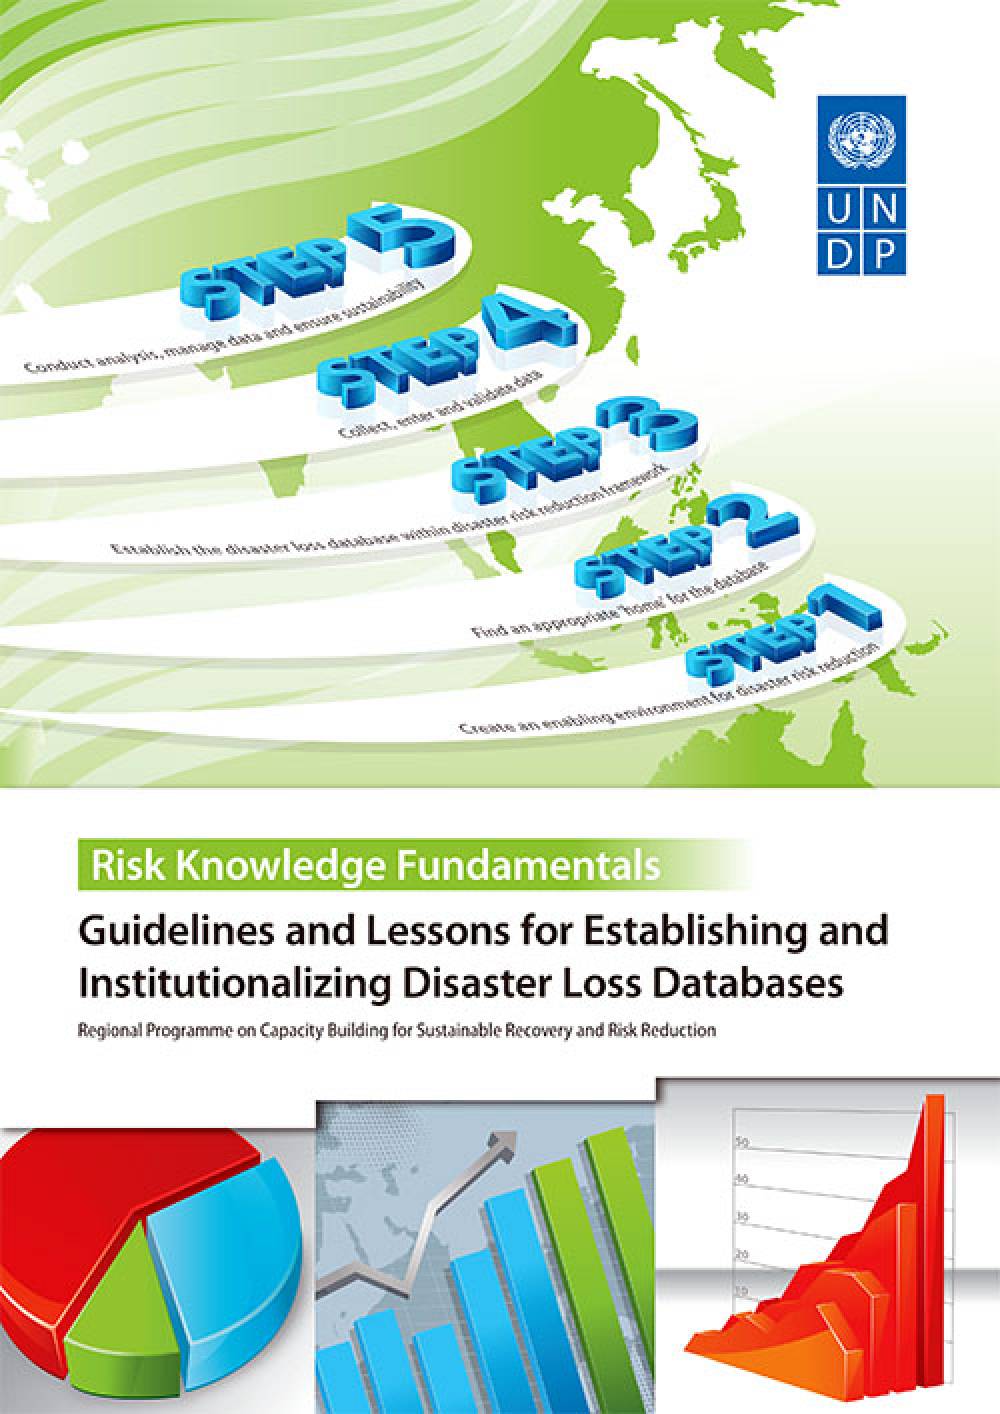 Guidelines and Lessons for Establishing and Institutionalizing Disaster Loss Databases